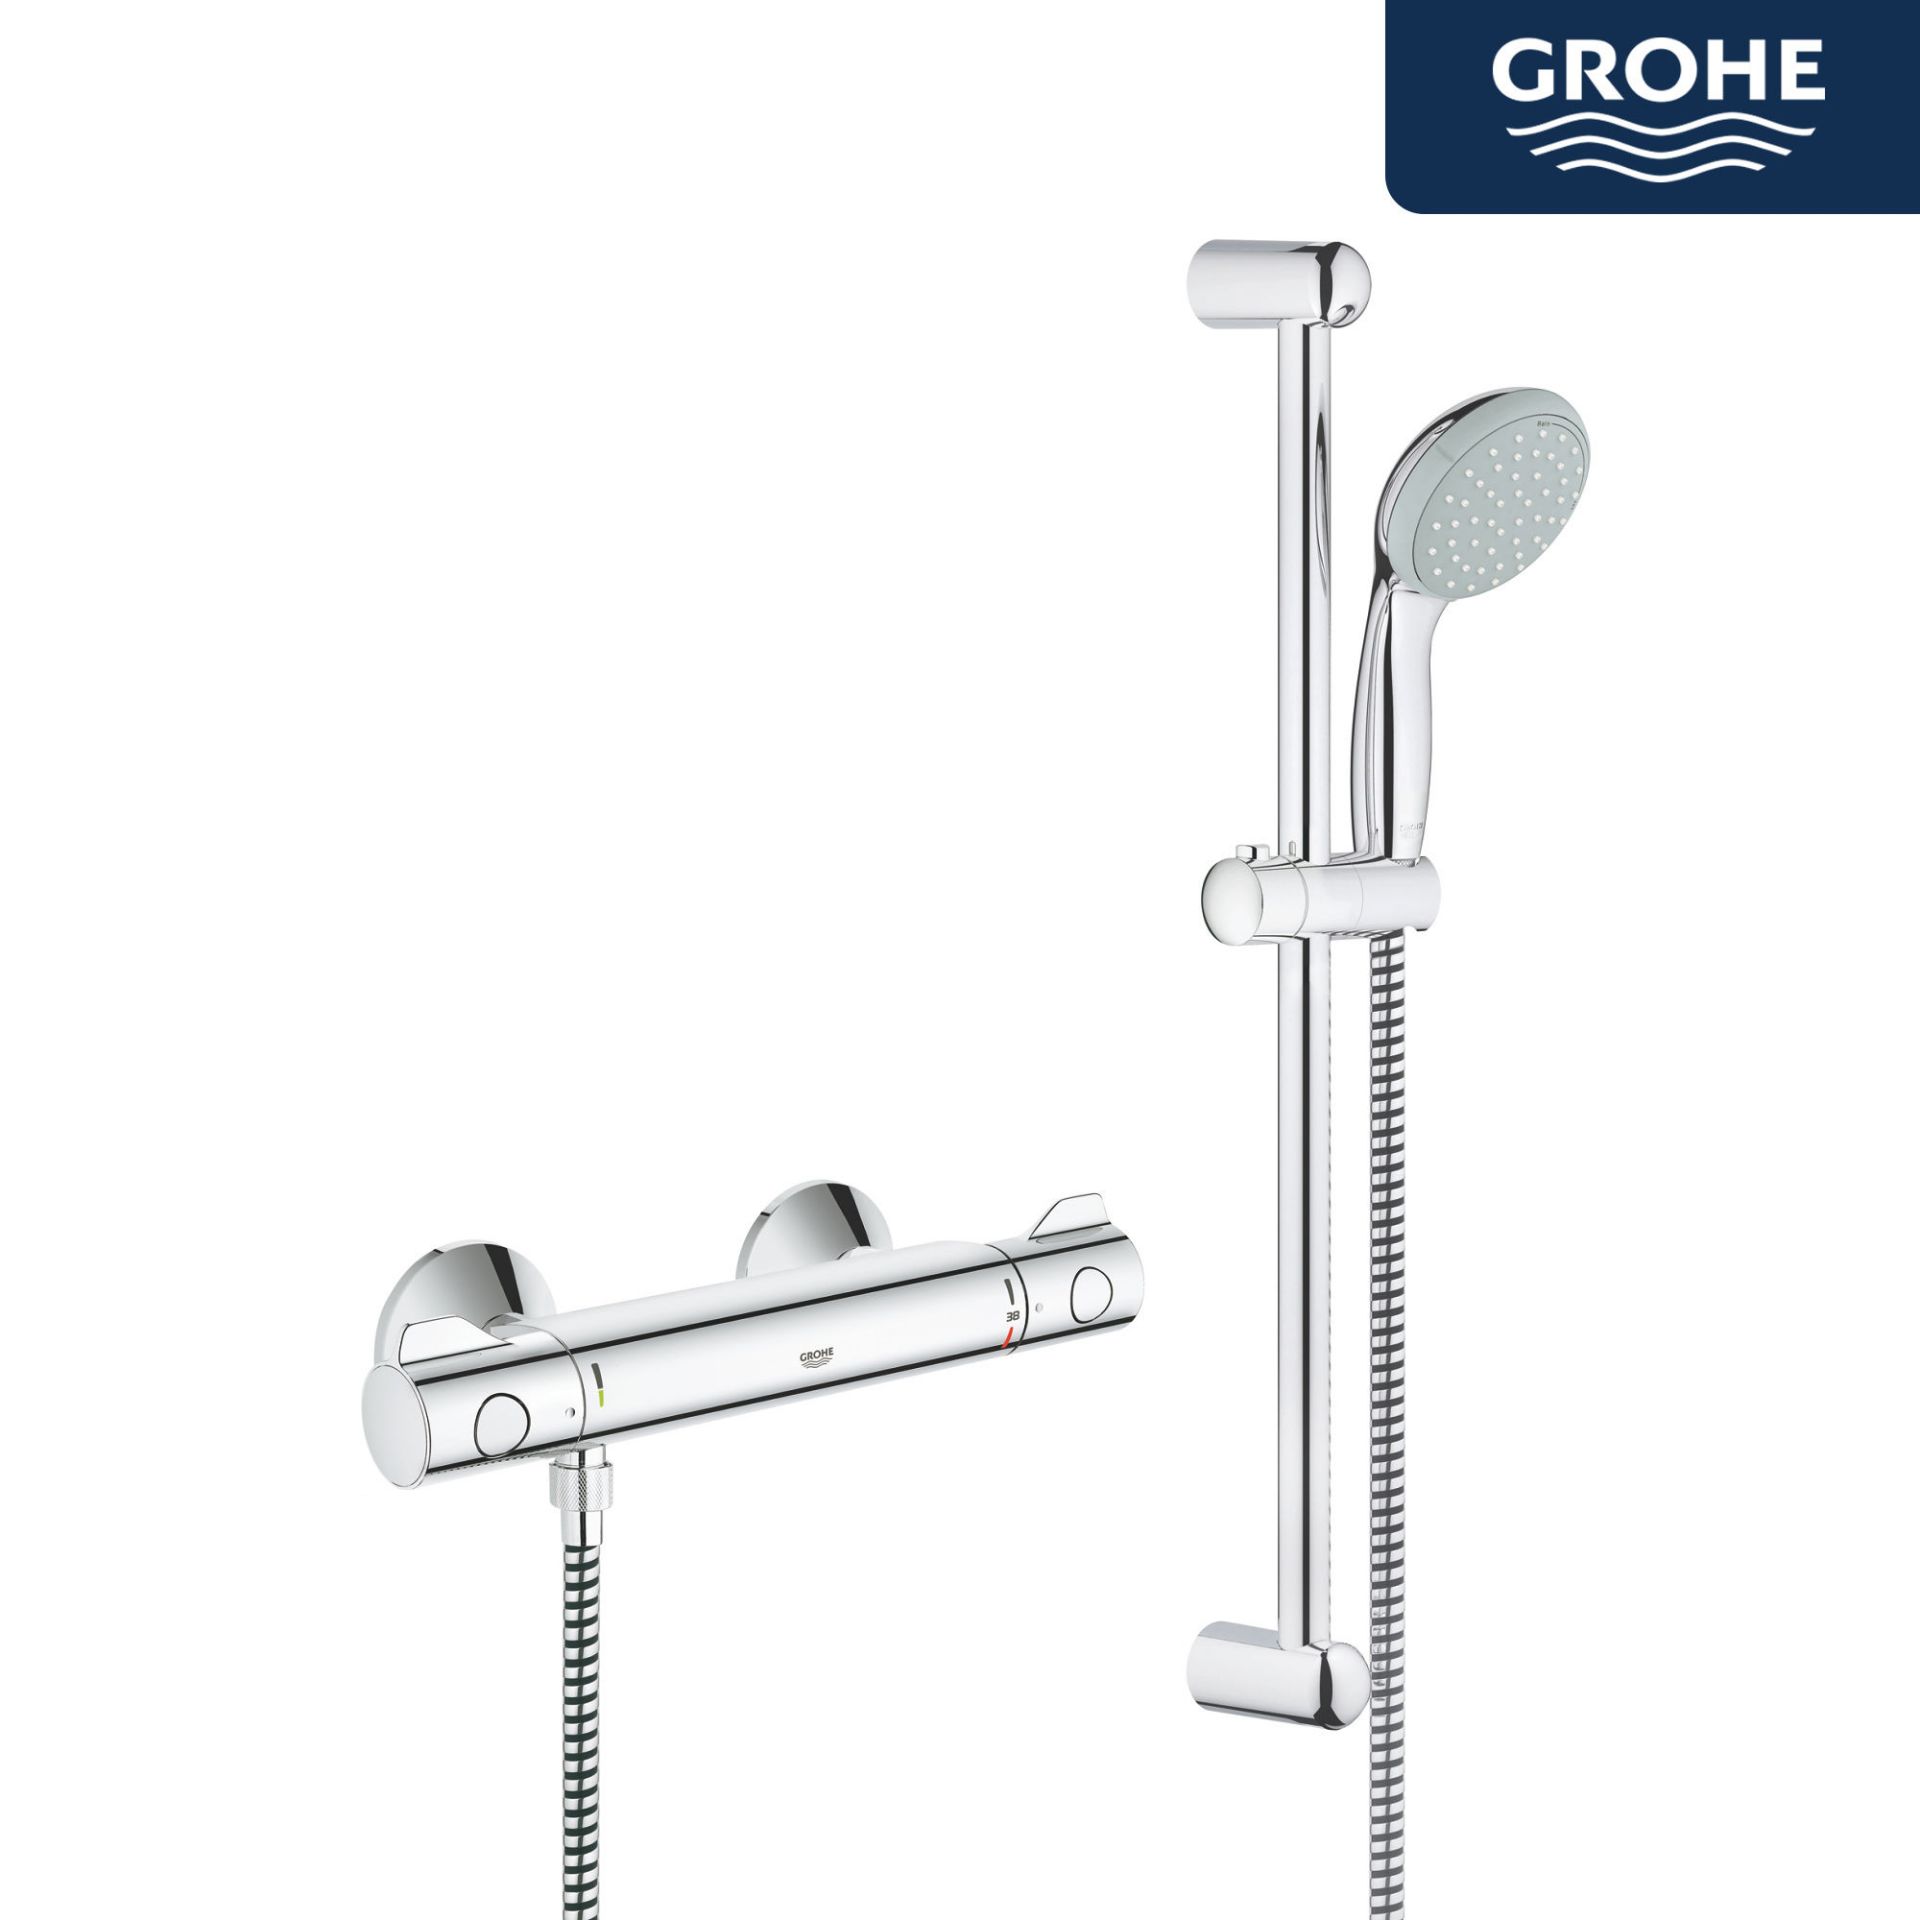 (EW302) Grohe Grohtherm 800 Thermostatic Shower Mixer and Kit. RRP £249.99. Set water temperature